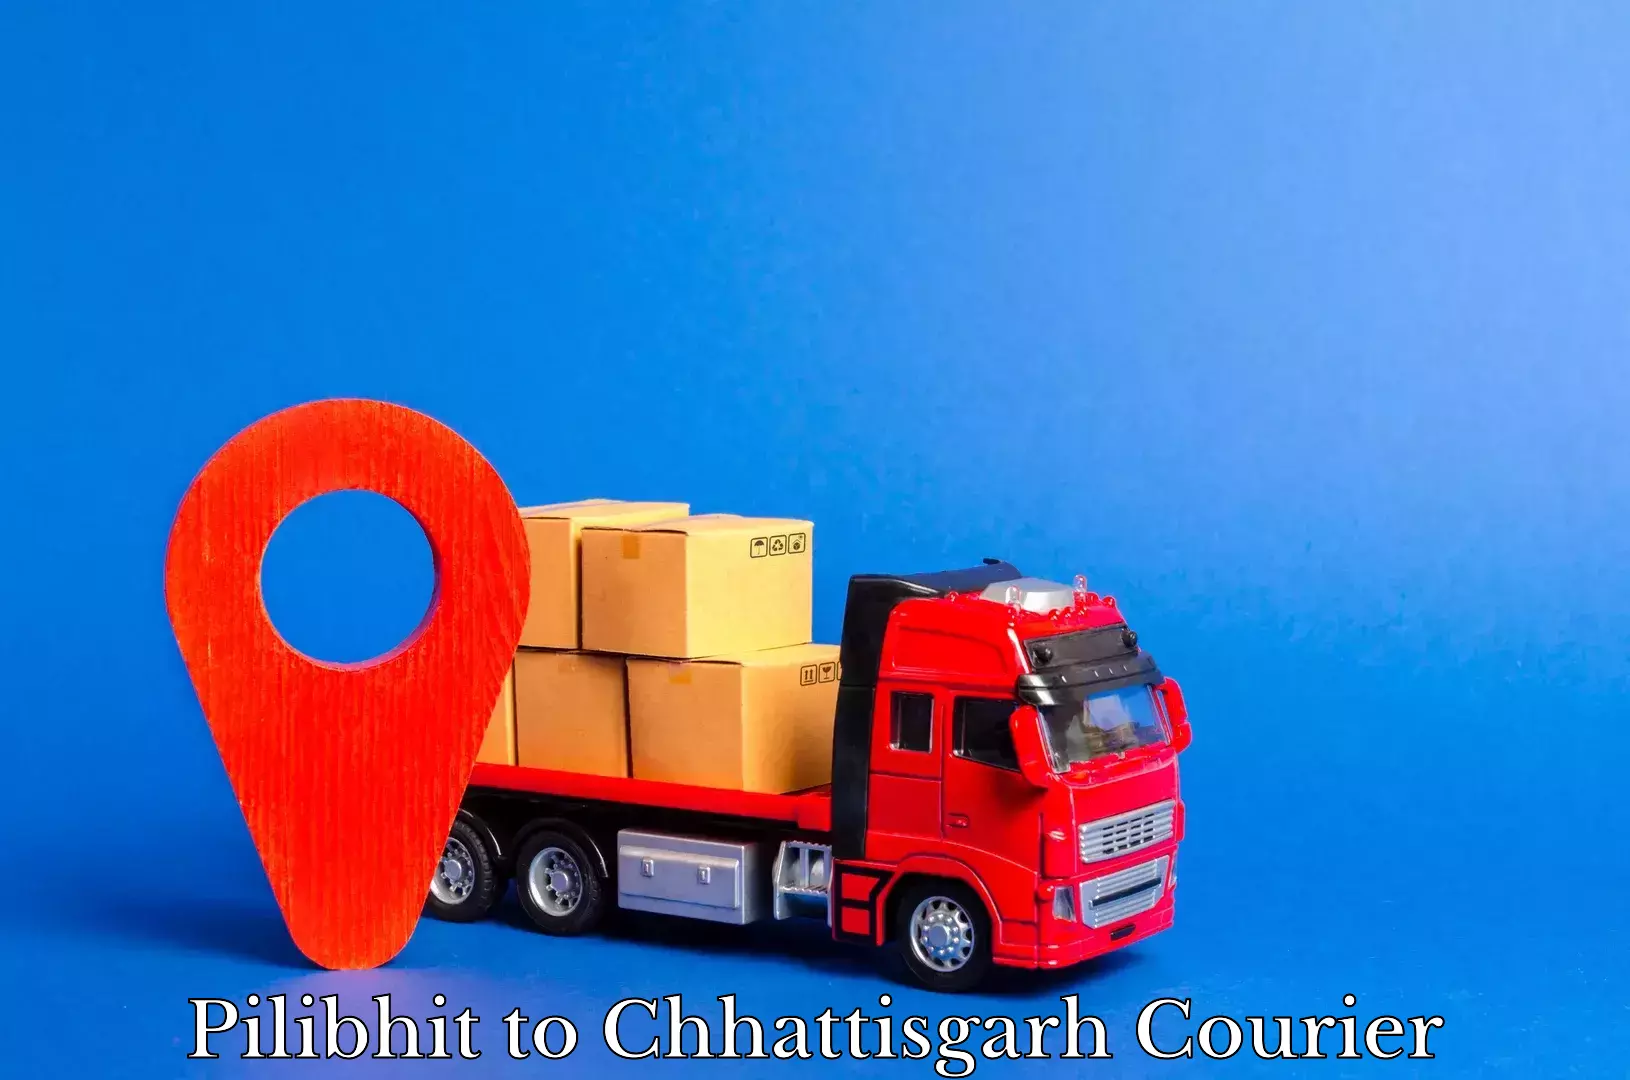 Reliable courier services Pilibhit to Chhattisgarh